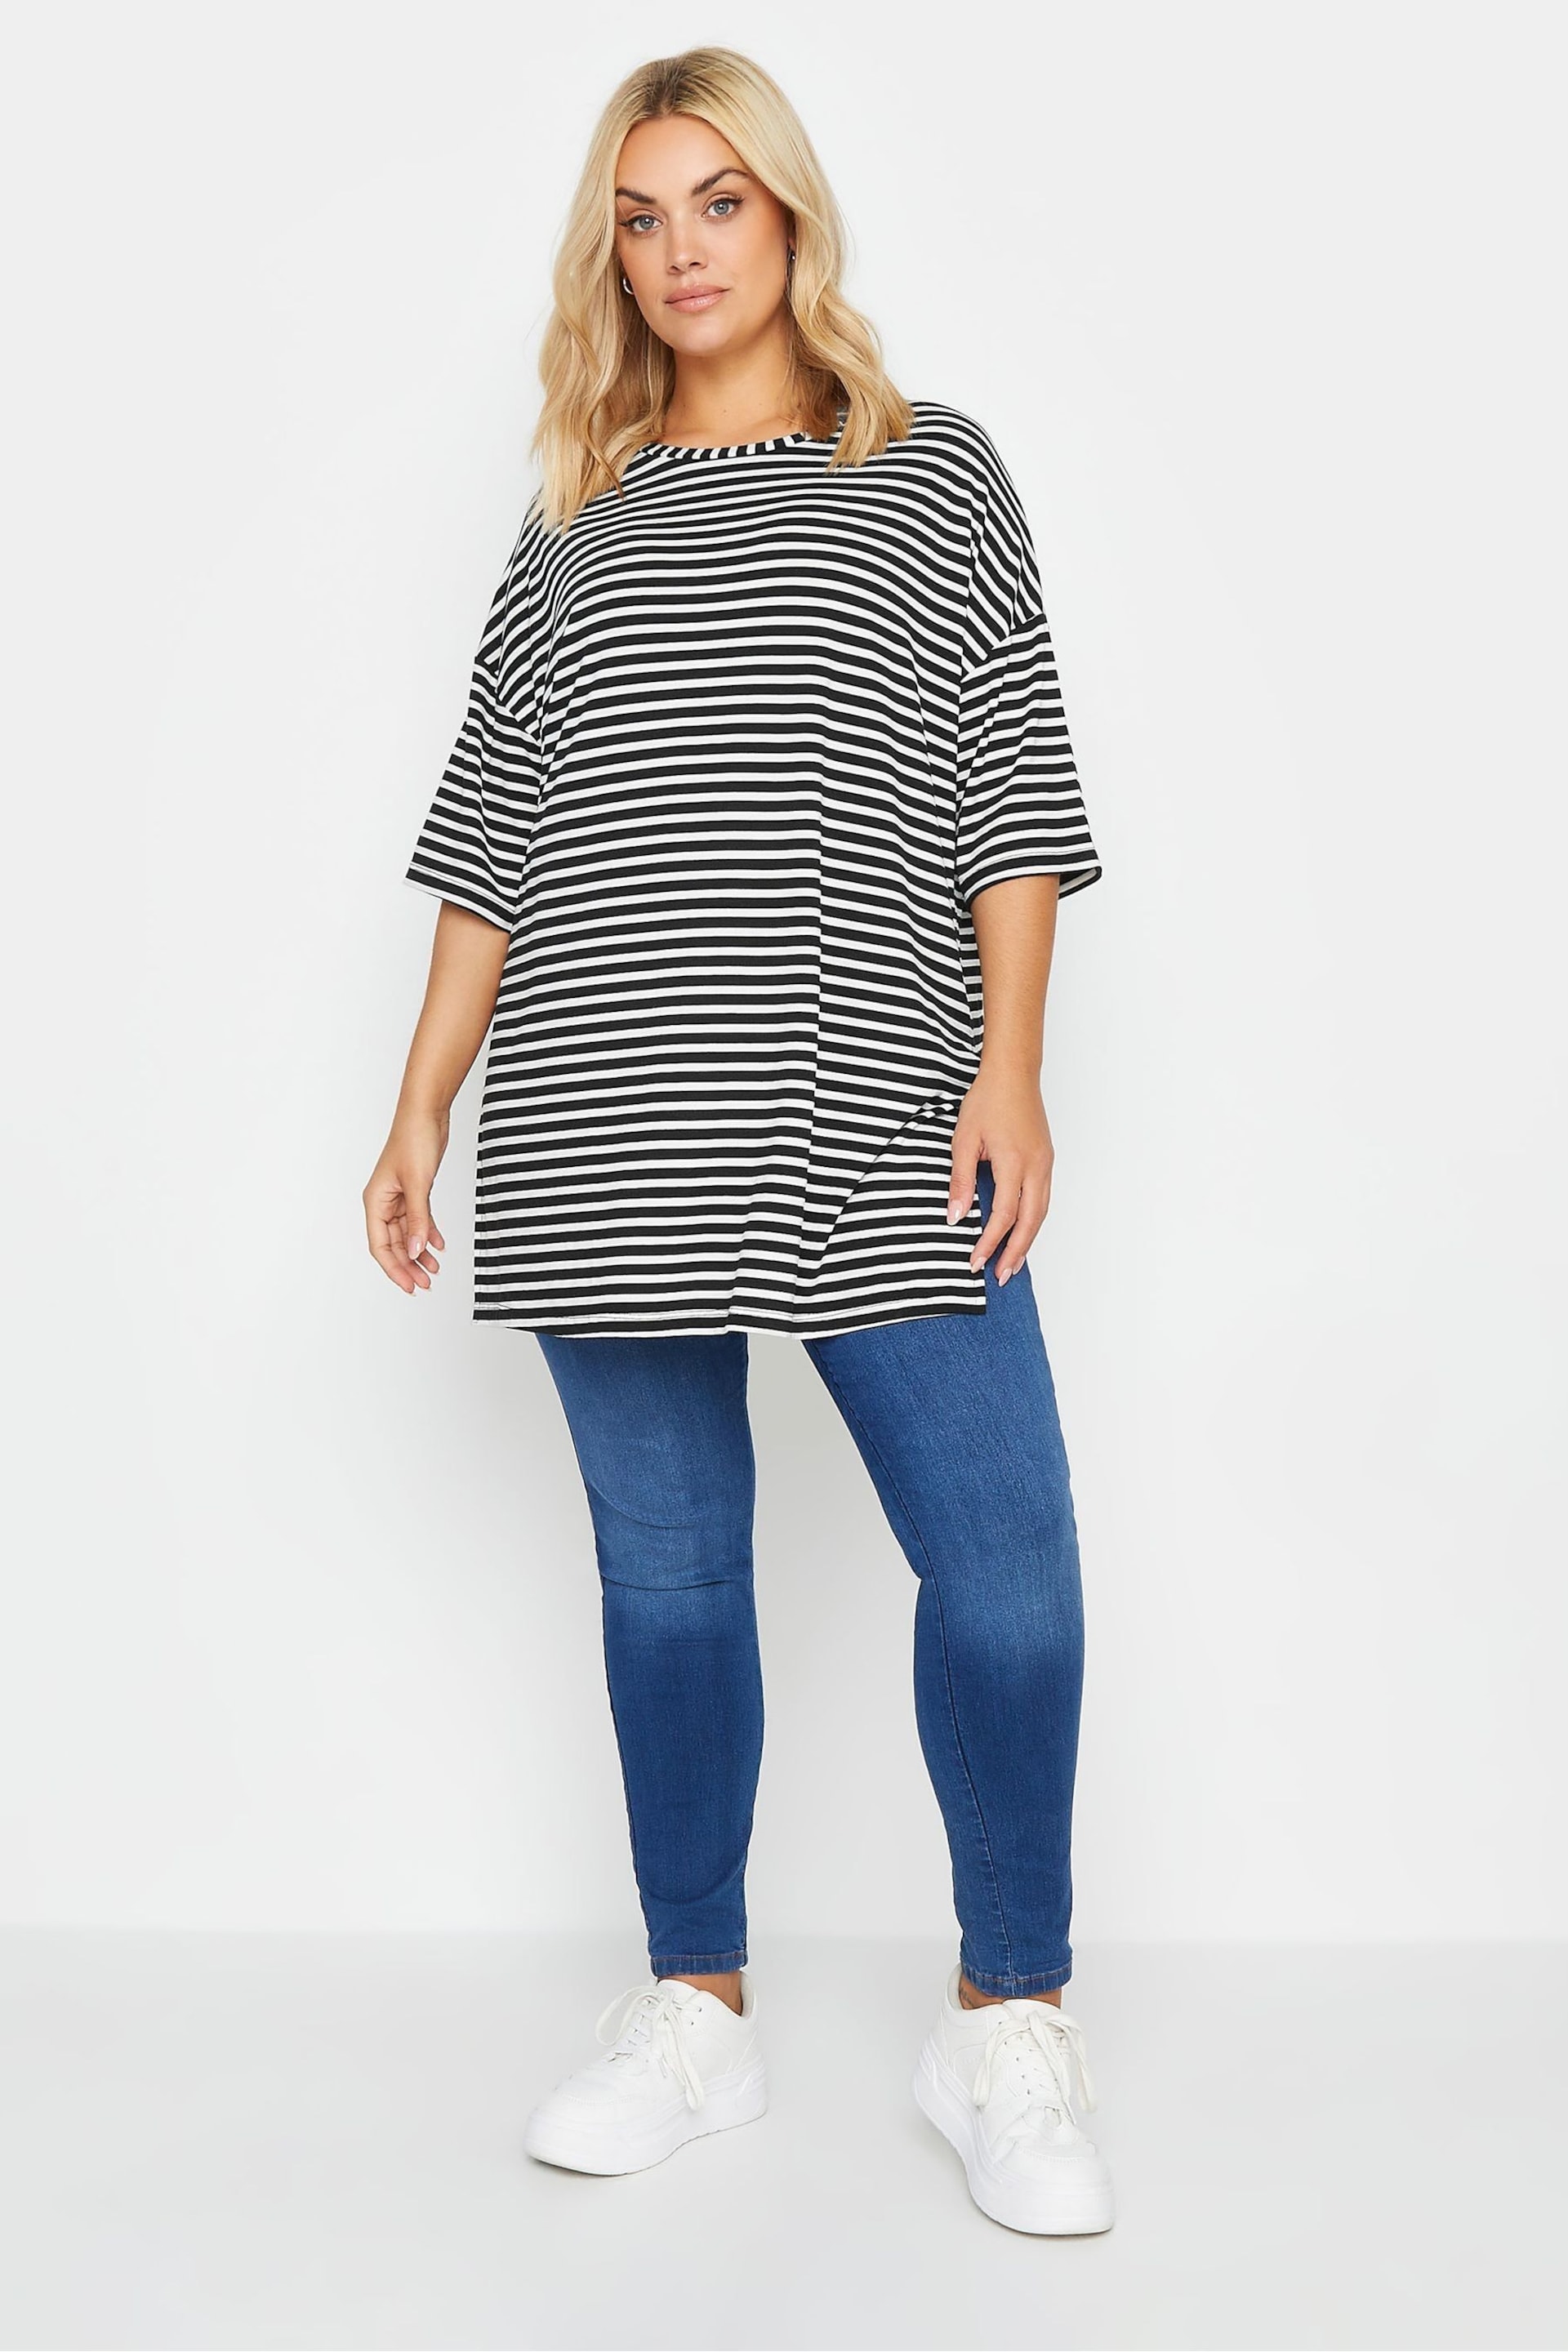 Yours Curve Black Striped Oversized Top - Image 2 of 5